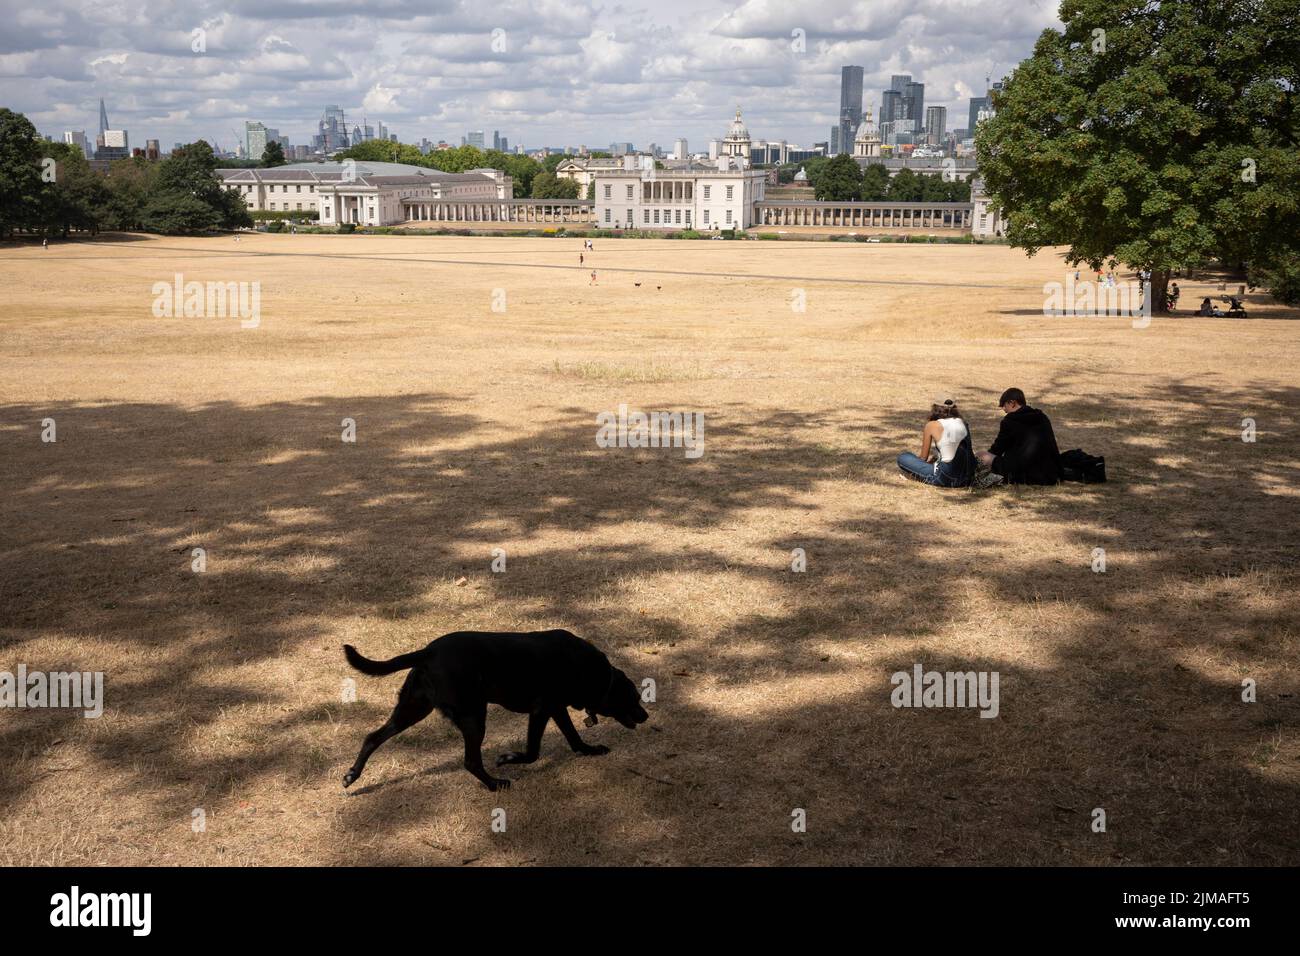 Overlooked by the former royal residence, Queen's House, a pet dog runs over a parched grass landscape in Greenwich Park as the UK's heatwave and drought continues into August with little rain having fallen in London and south-east England, on 4th August 2022, in London, England. Stock Photo